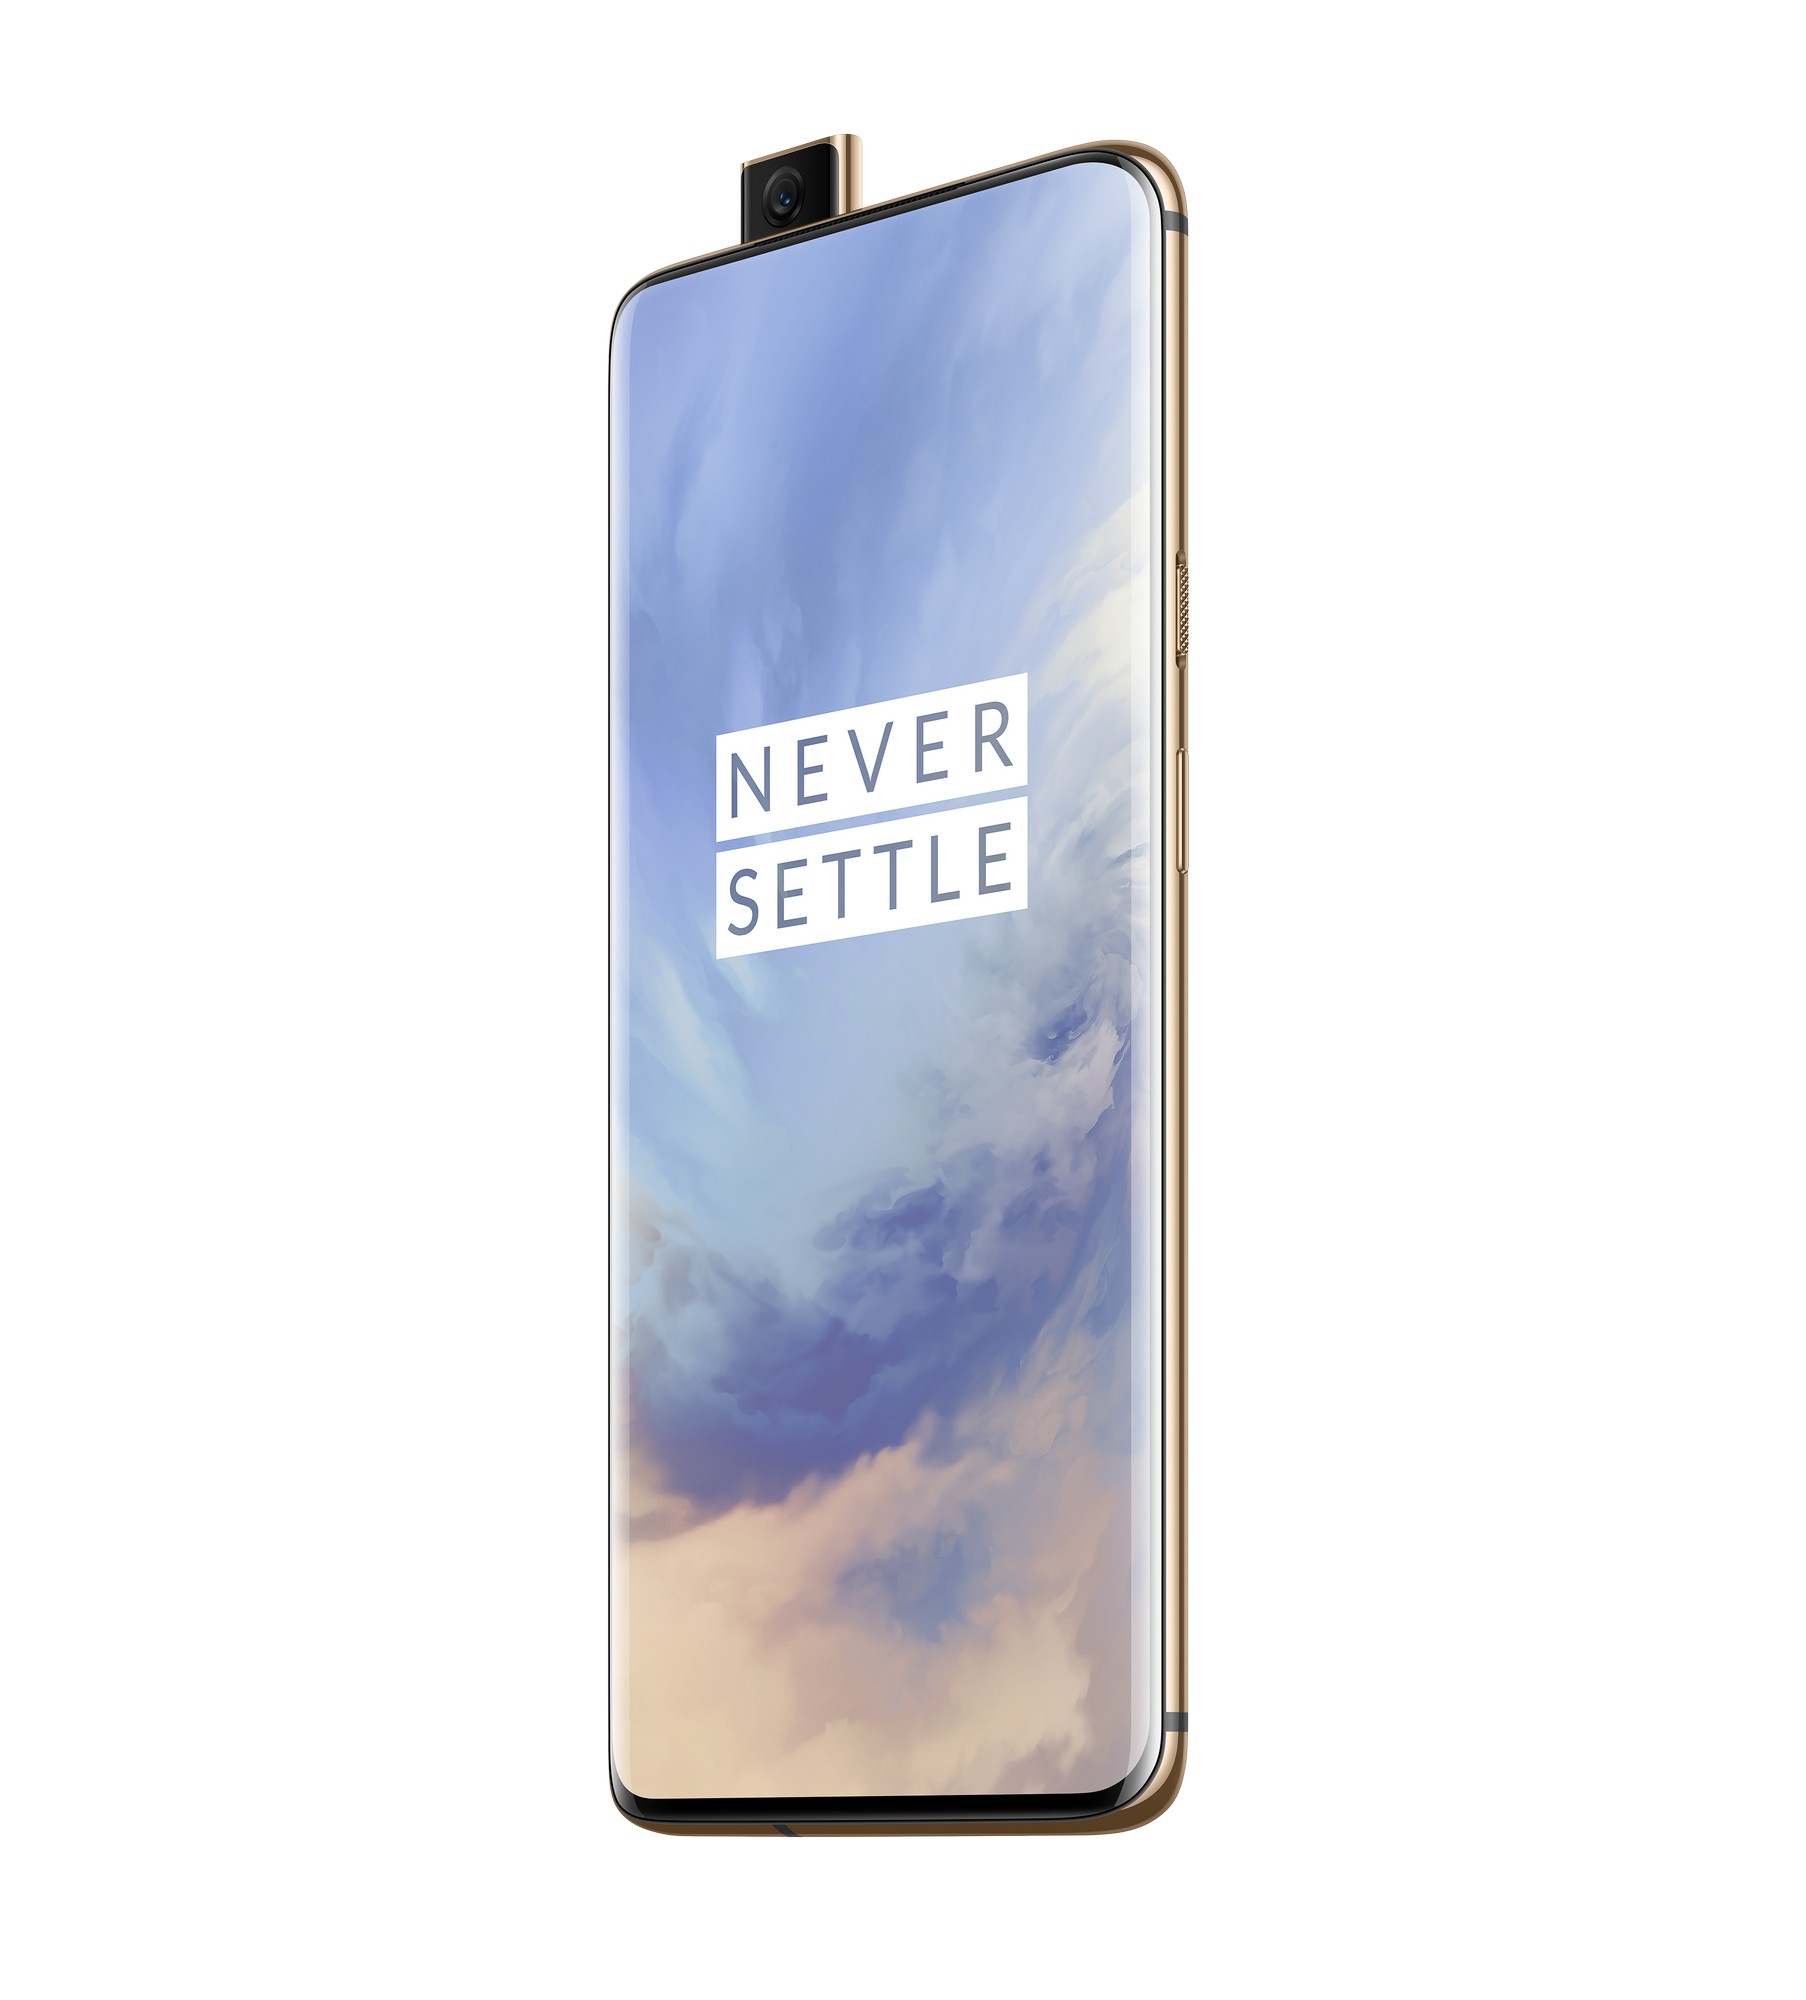 Almond coloured OnePlus 7 Pro will go on sale in India starting June 14